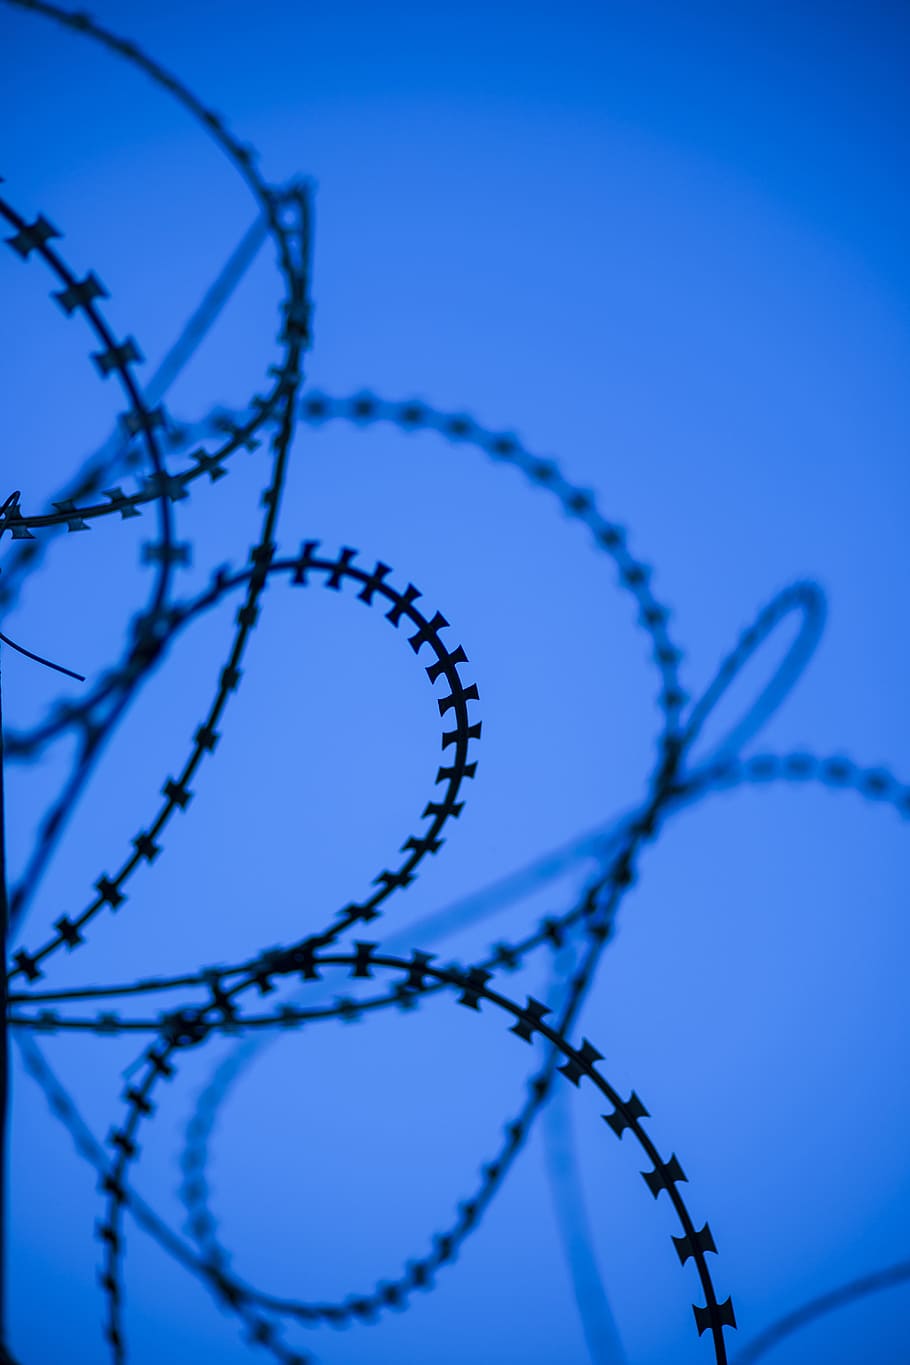 Wire, Engel, Color Image, backgrounds, prison, blue, barricade, abstract pattern, copy space, close-up